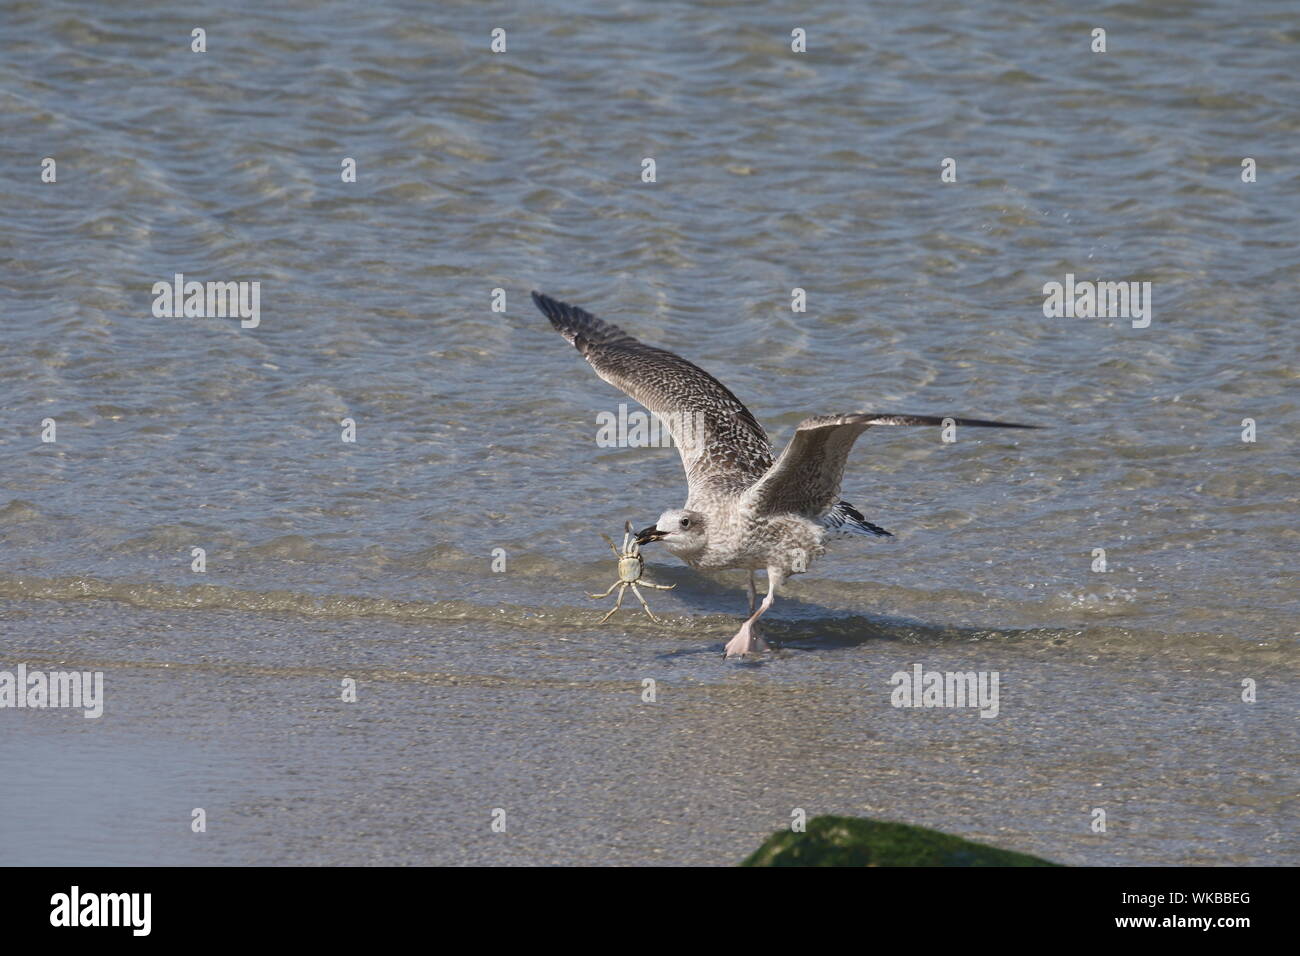 Bird Hunting Insect At Beach Stock Photo